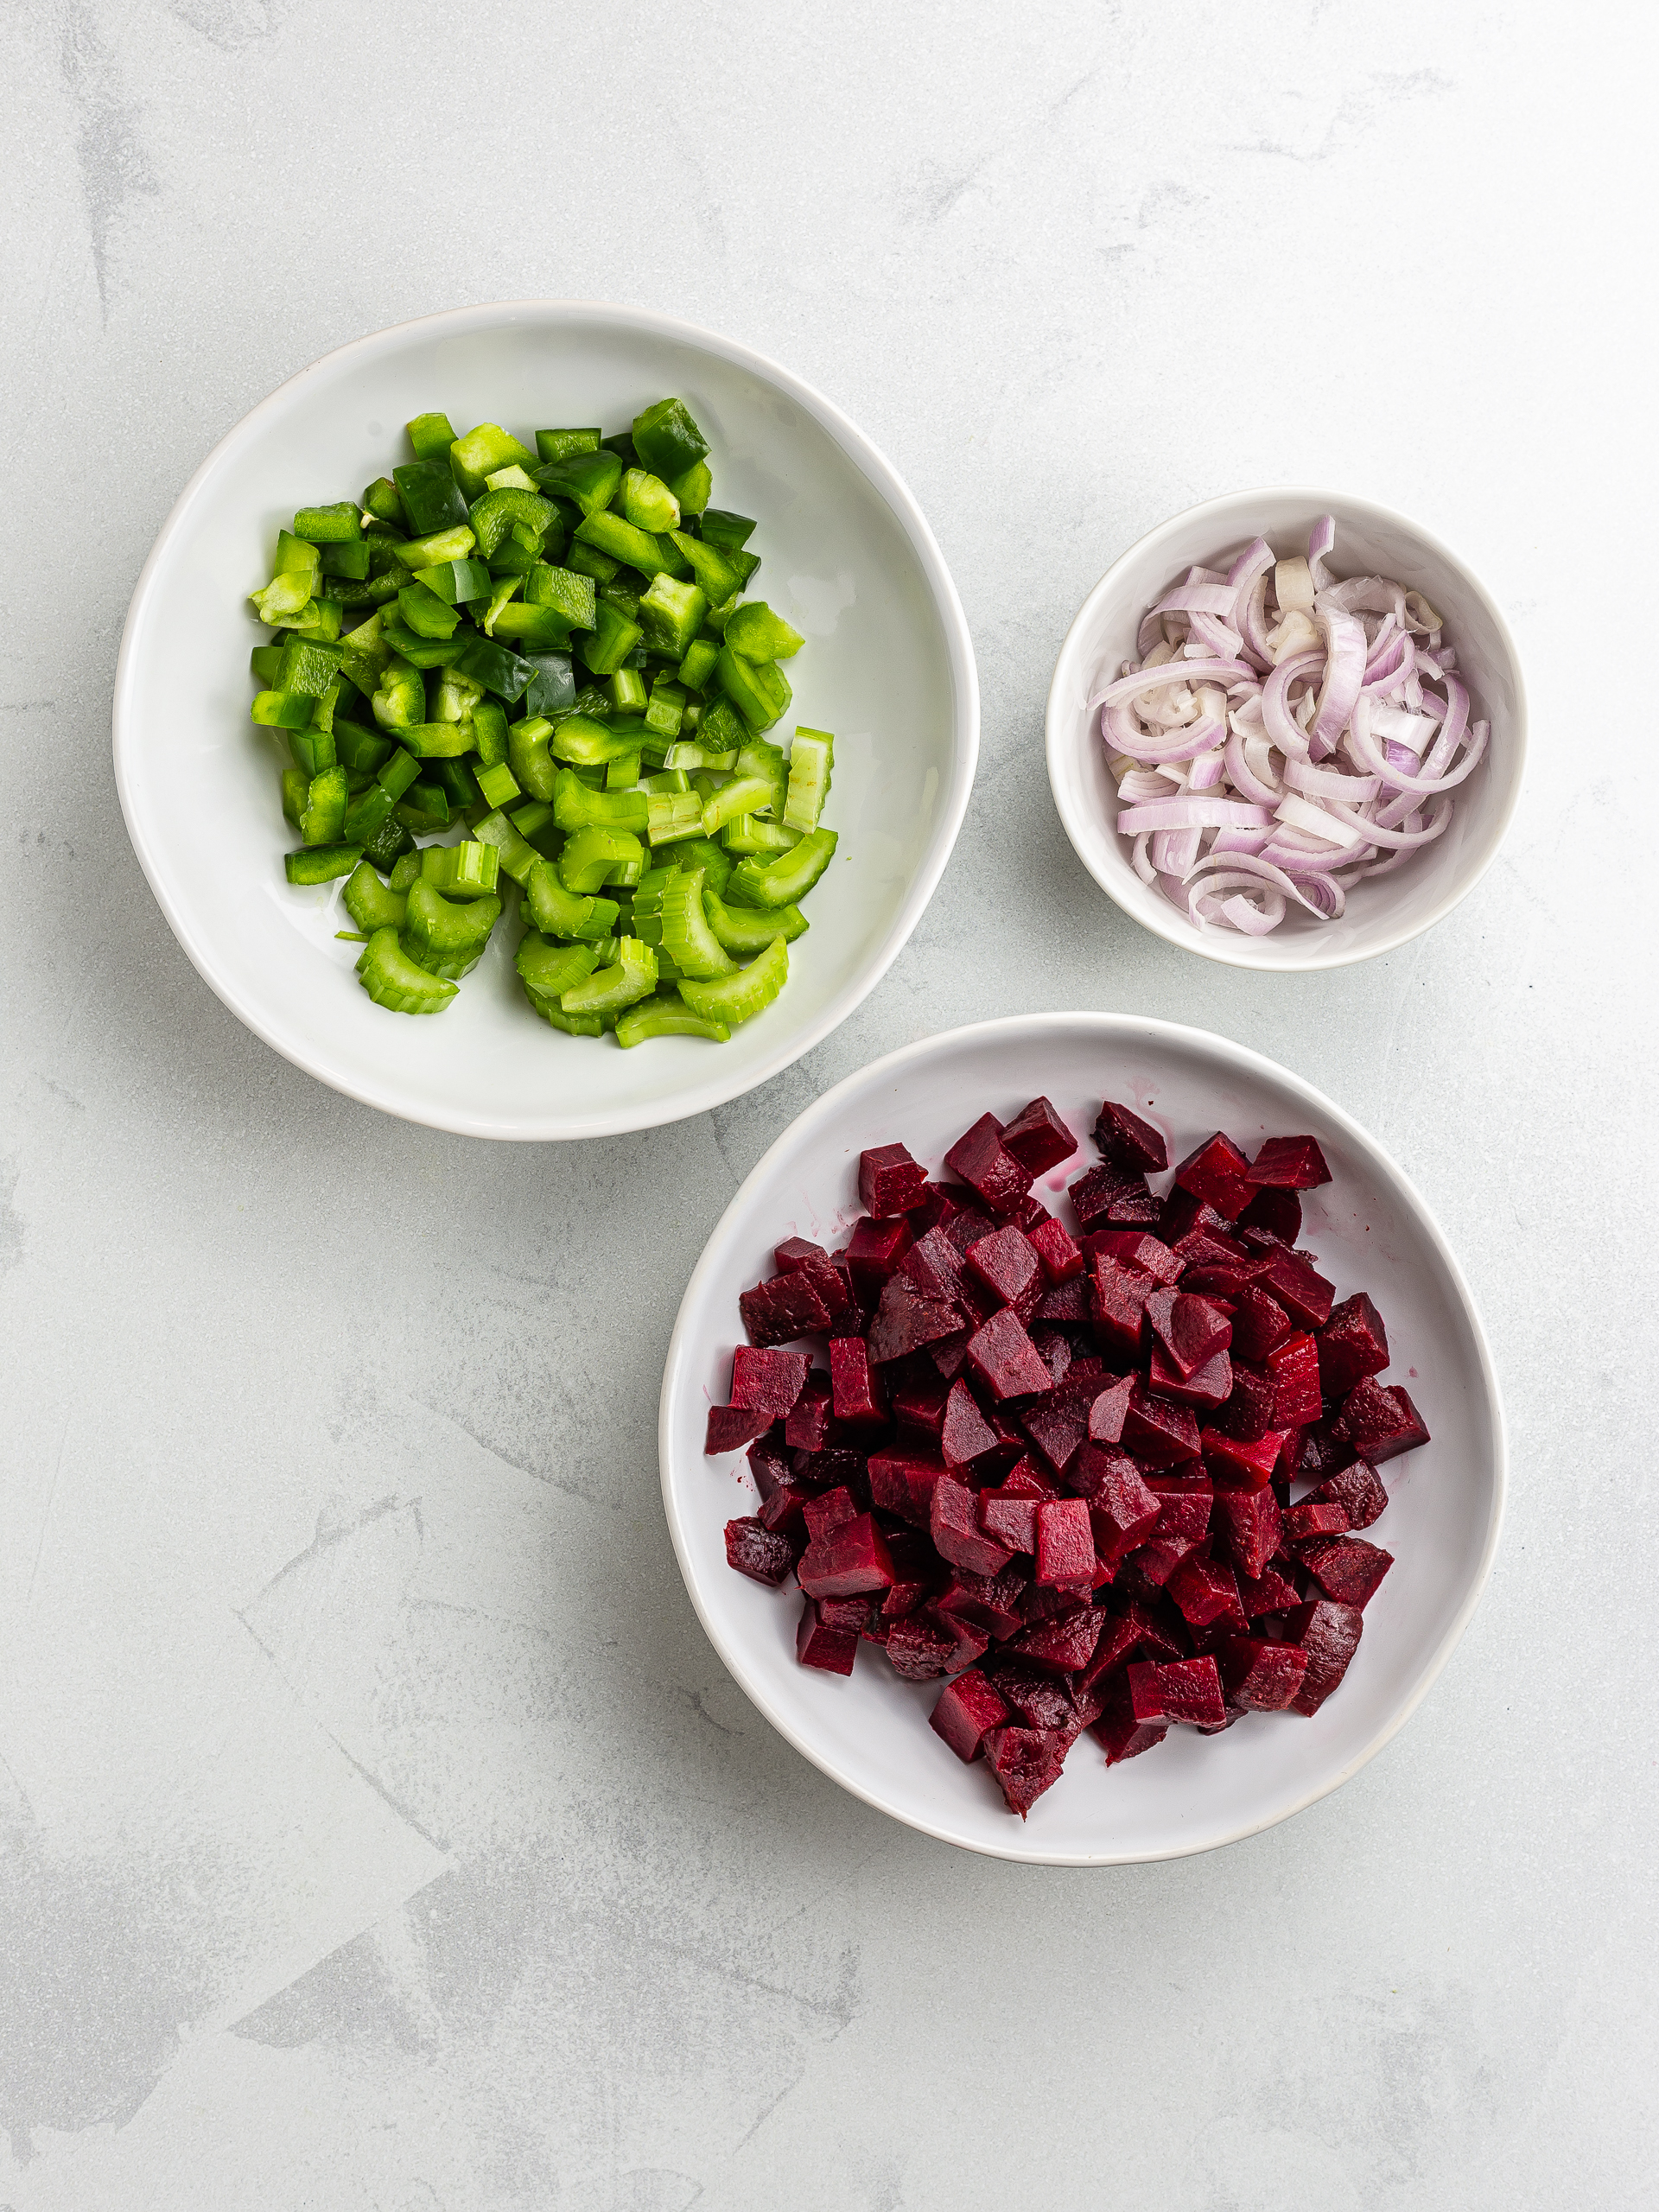 diced beets, peppers, and celery